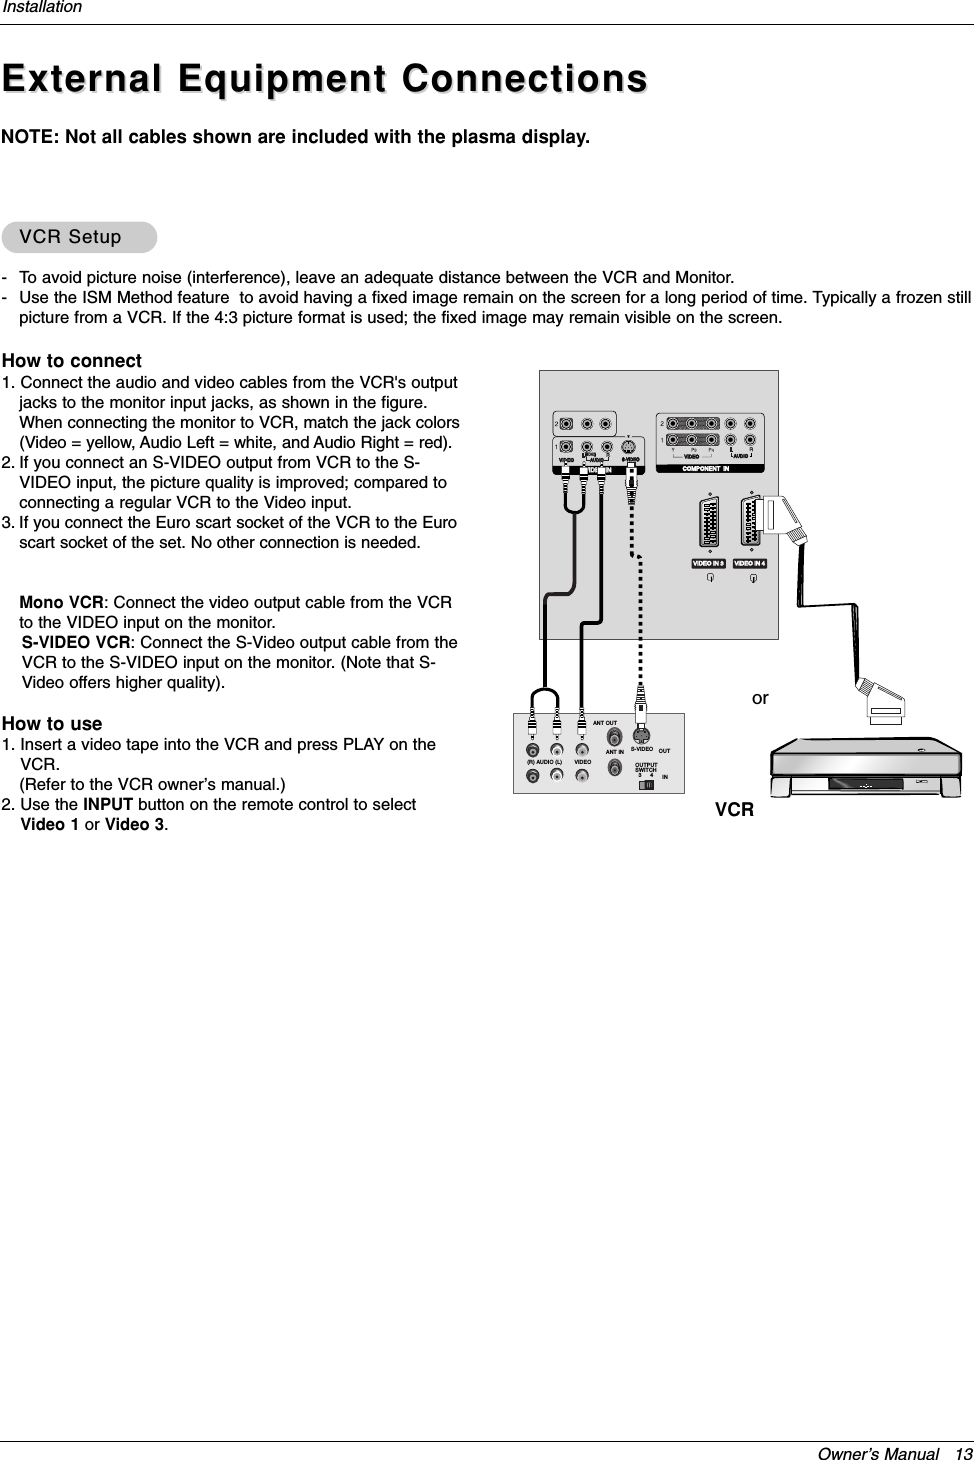 Owner’s Manual   13InstallationExternal Equipment ConnectionsExternal Equipment ConnectionsNOTE: Not all cables shown are included with the plasma display.- To avoid picture noise (interference), leave an adequate distance between the VCR and Monitor.- Use the ISM Method feature  to avoid having a fixed image remain on the screen for a long period of time. Typically a frozen stillpicture from a VCR. If the 4:3 picture format is used; the fixed image may remain visible on the screen.How to connect1. Connect the audio and video cables from the VCR&apos;s outputjacks to the monitor input jacks, as shown in the figure. When connecting the monitor to VCR, match the jack colors(Video = yellow, Audio Left = white, and Audio Right = red).2. If you connect an S-VIDEO output from VCR to the S-VIDEO input, the picture quality is improved; compared toconnecting a regular VCR to the Video input.3. If you connect the Euro scart socket of the VCR to the Euroscart socket of the set. No other connection is needed.Mono VCR: Connect the video output cable from the VCRto the VIDEO input on the monitor.S-VIDEO VCR: Connect the S-Video output cable from theVCR to the S-VIDEO input on the monitor. (Note that S-Video offers higher quality).How to use1. Insert a video tape into the VCR and press PLAY on theVCR. (Refer to the VCR owner’s manual.) 2. Use the INPUT button on the remote control to selectVideo 1 or Video 3.VCR SetupVCR SetupVIDEOAUDIOCOMPONENT  INVIDEOAUDIOMONO(                        )S-VIDEOVIDEO INVIDEO INVIDEO IN 3 VIDEO IN 4S-VIDEO OUTIN(R) AUDIO (L) VIDEO34OUTPUTSWITCHANT OUTANT INVCRor